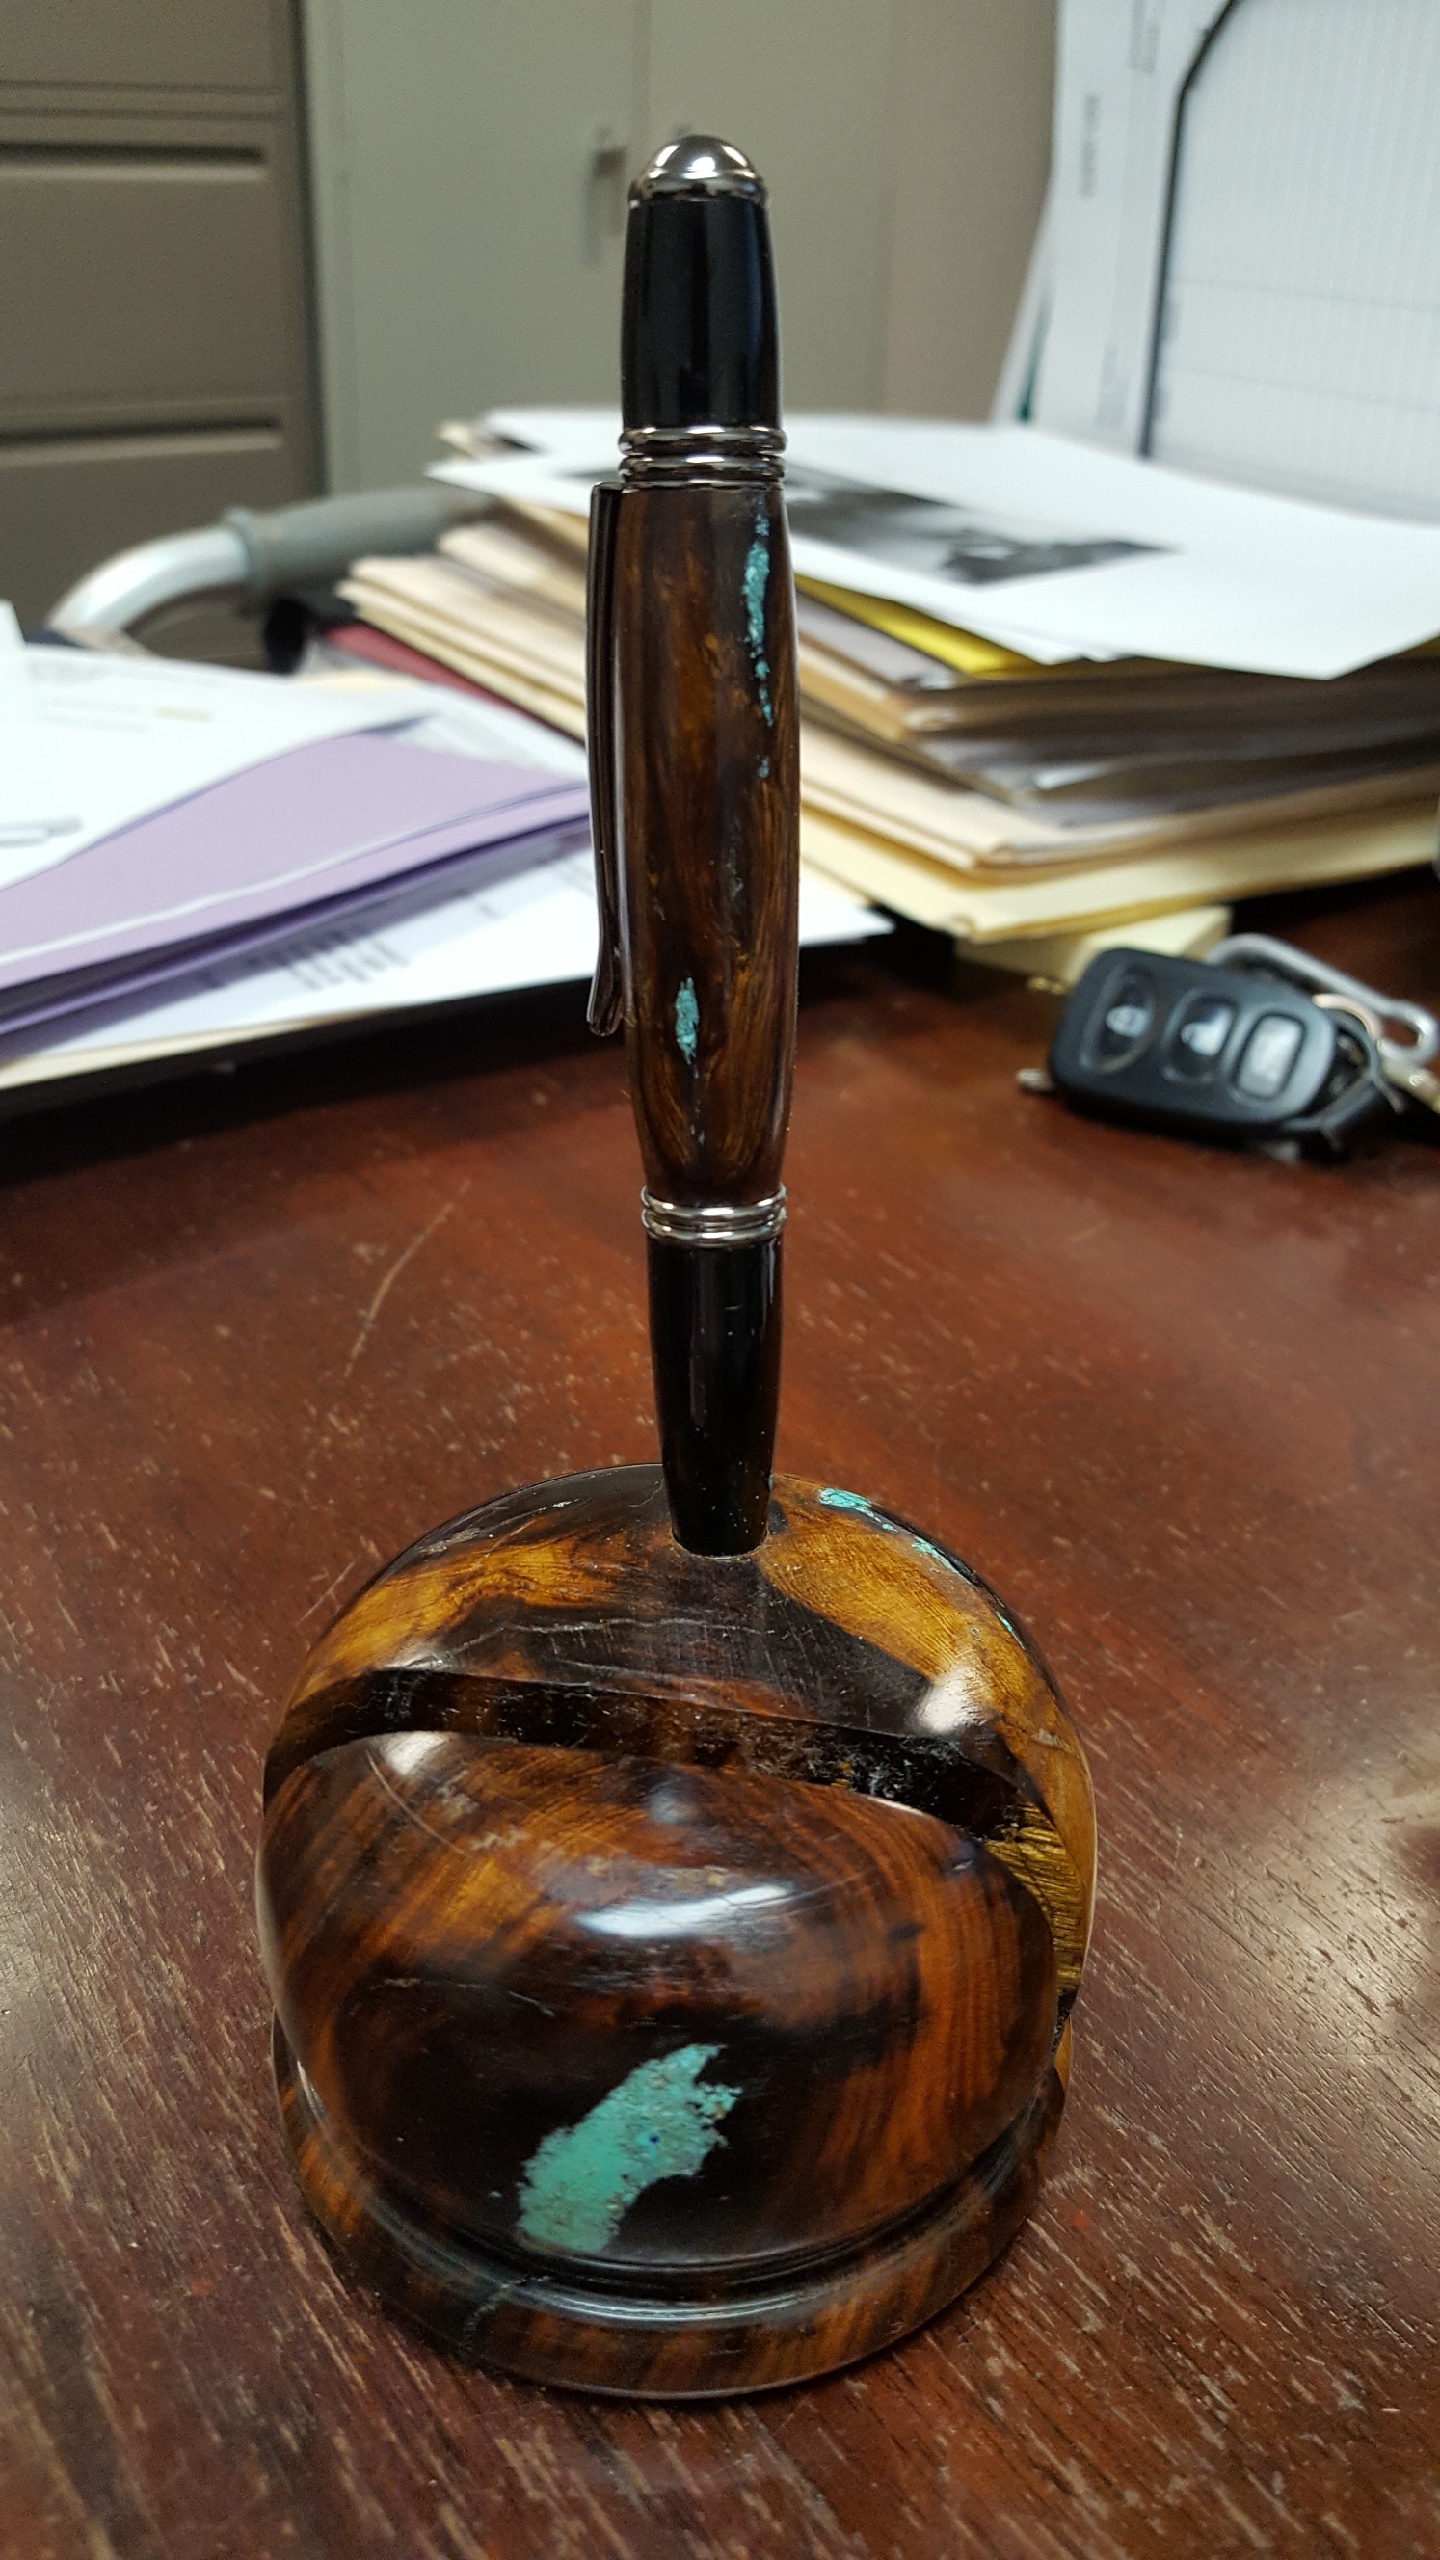 Blind-turned pen and stand